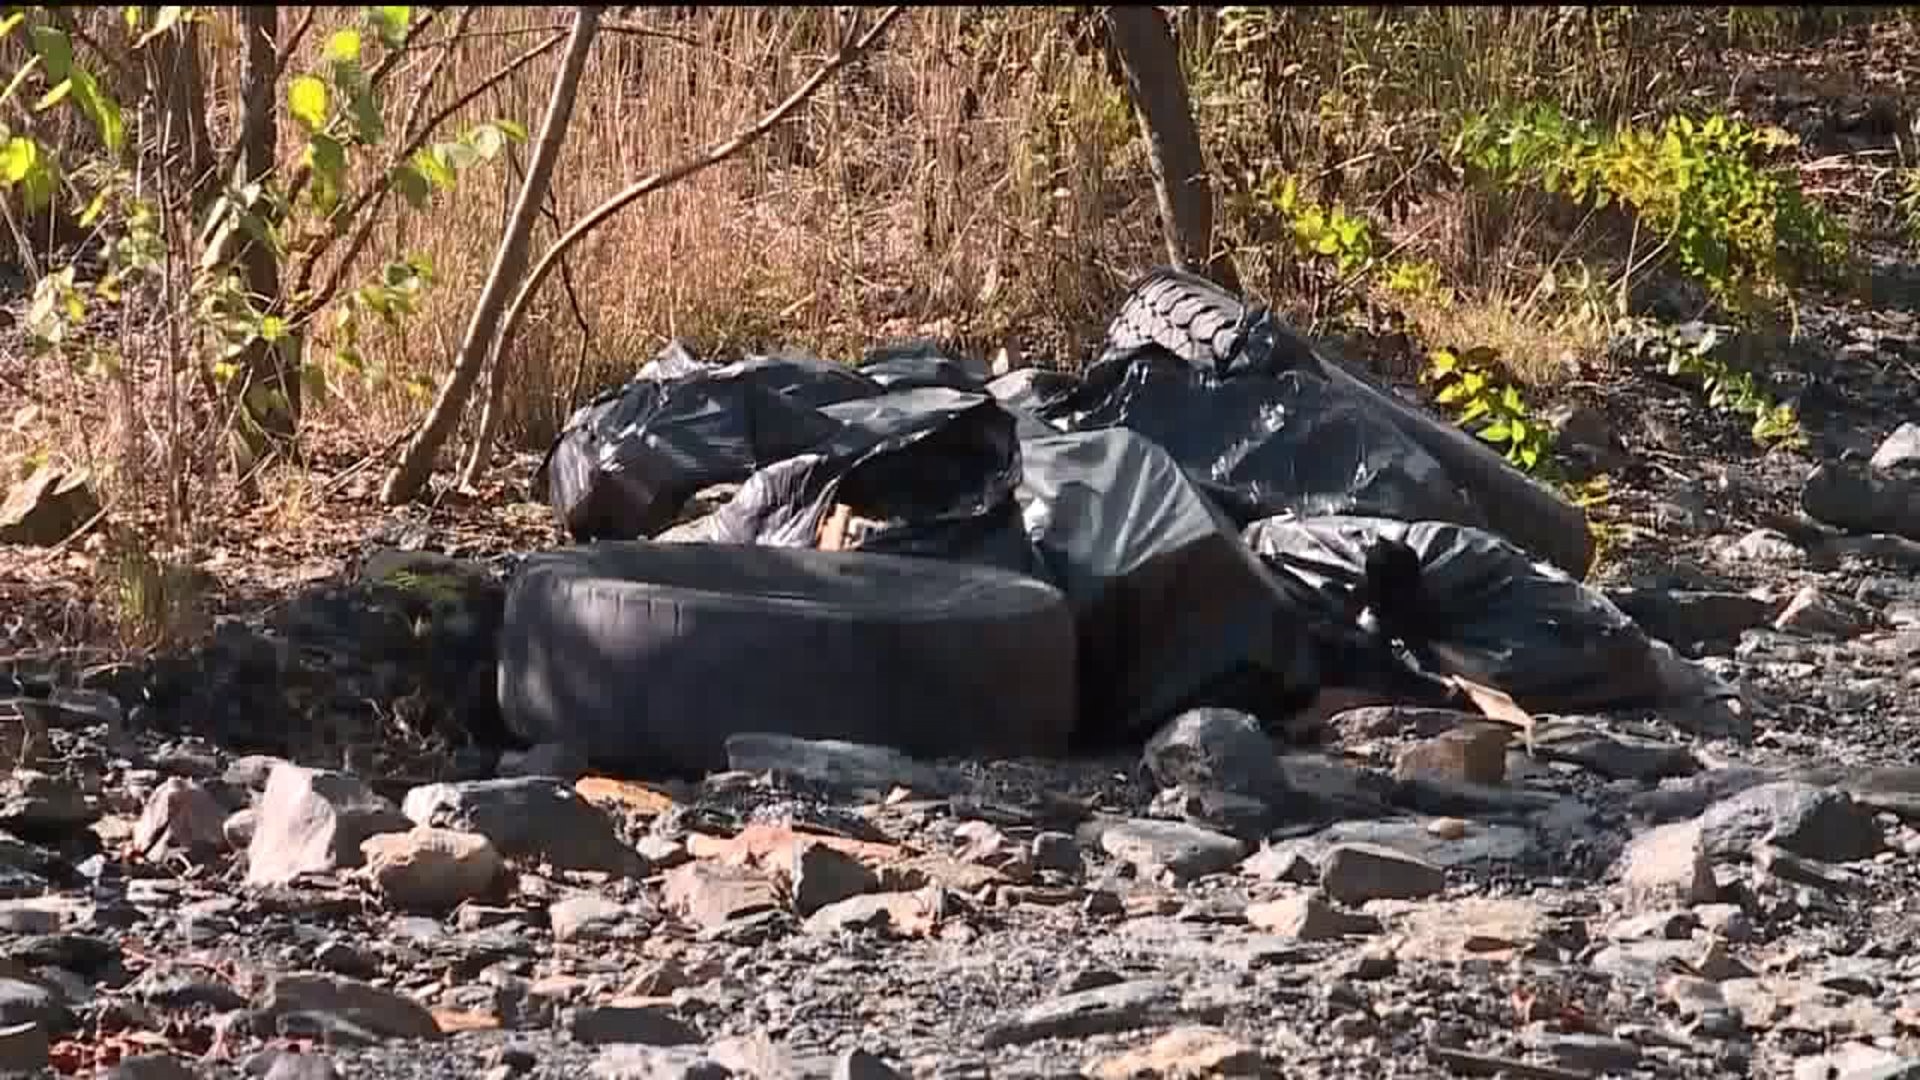 Viral Video of Illegal Dumpers Prompts Community Cleanup